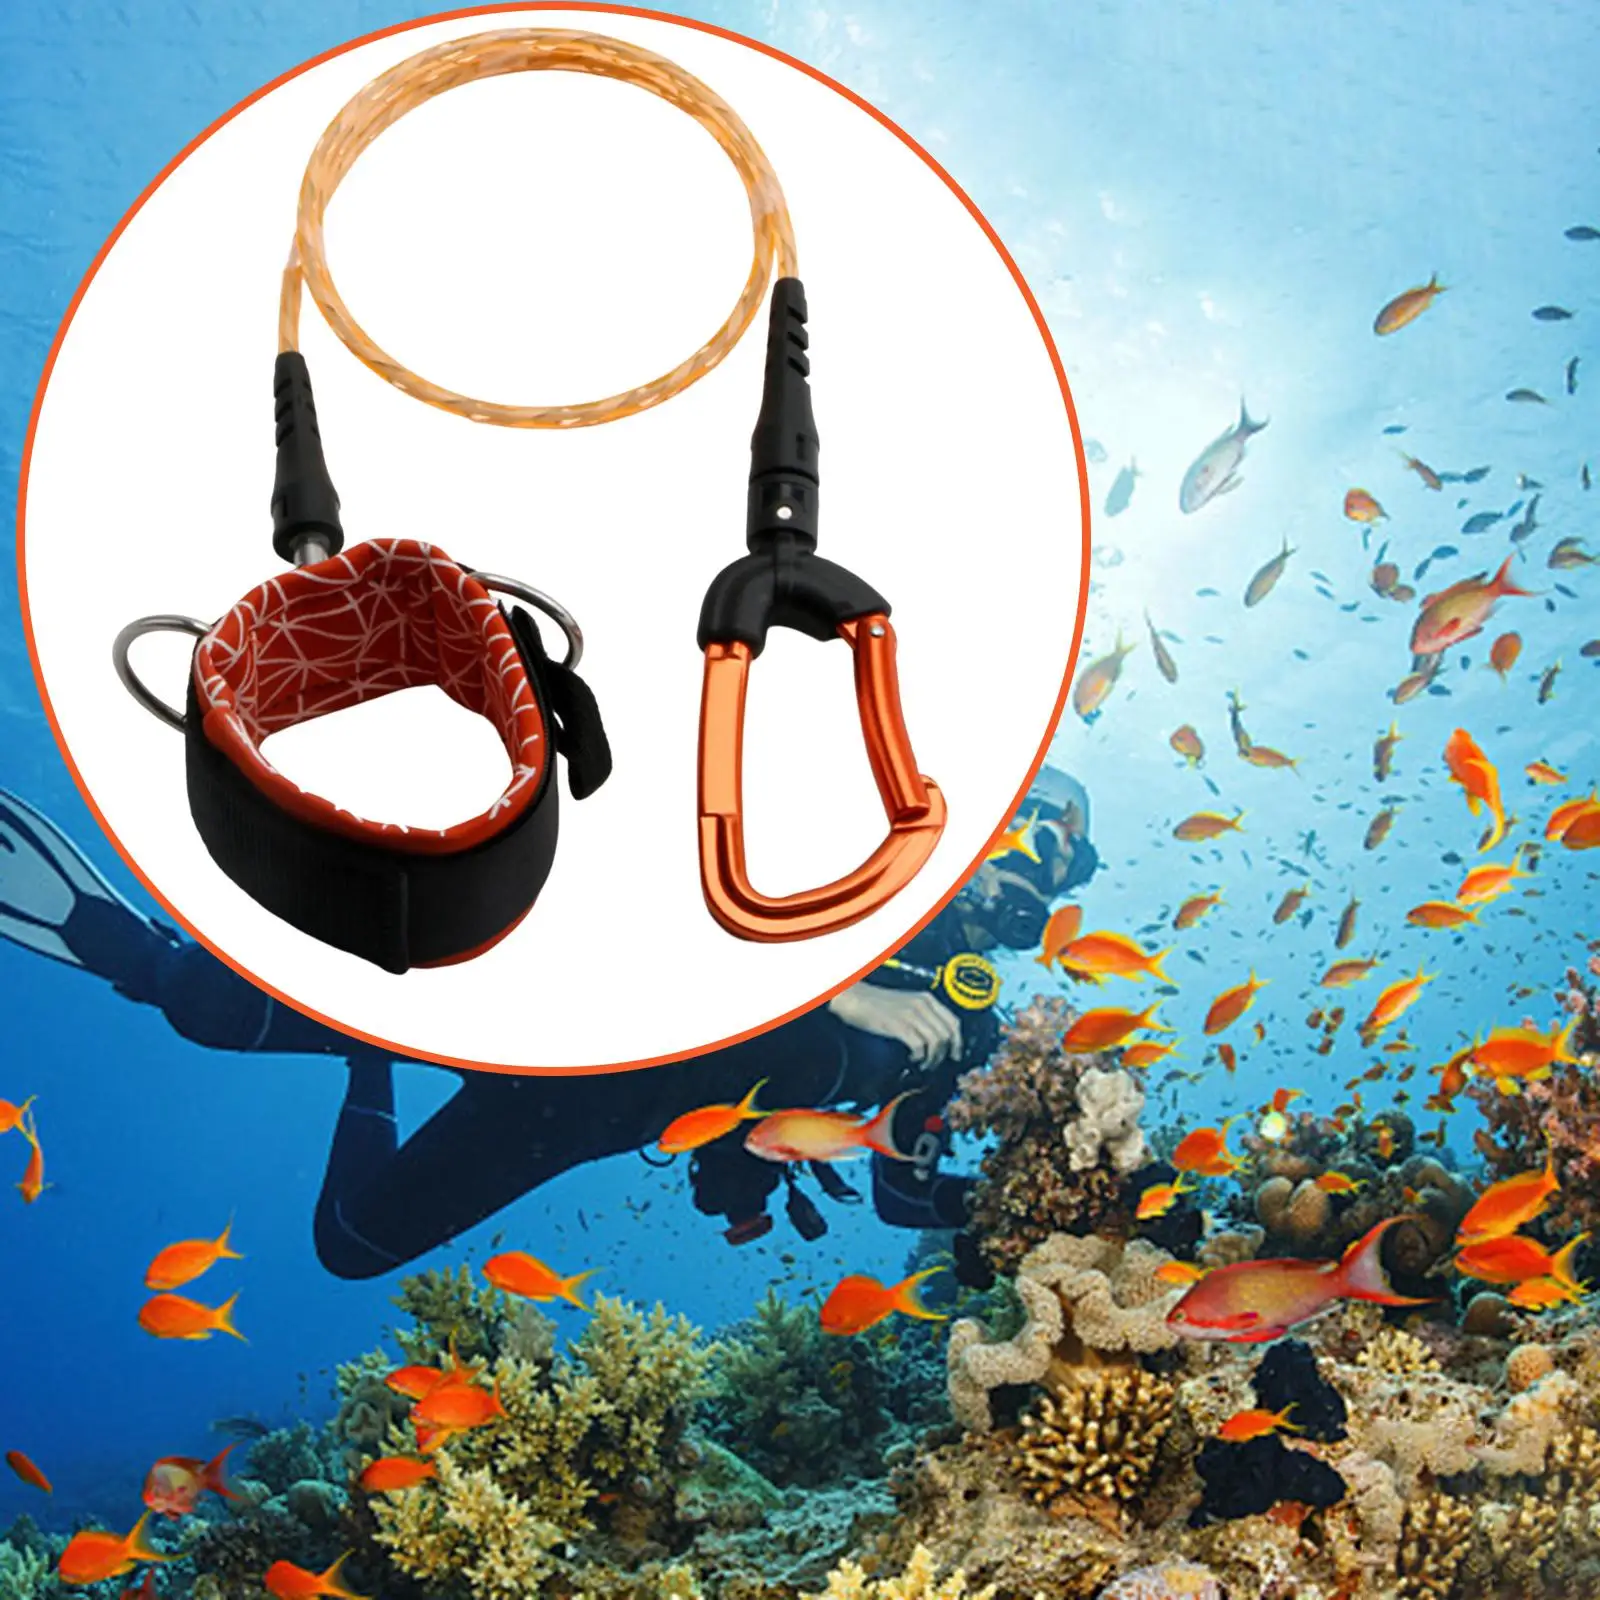 Freediving Lanyard Wristband Strap Breaking Force 24kN Safety Rope for Scuba Diving Freediving Snorkeling Underwater Sports Gear